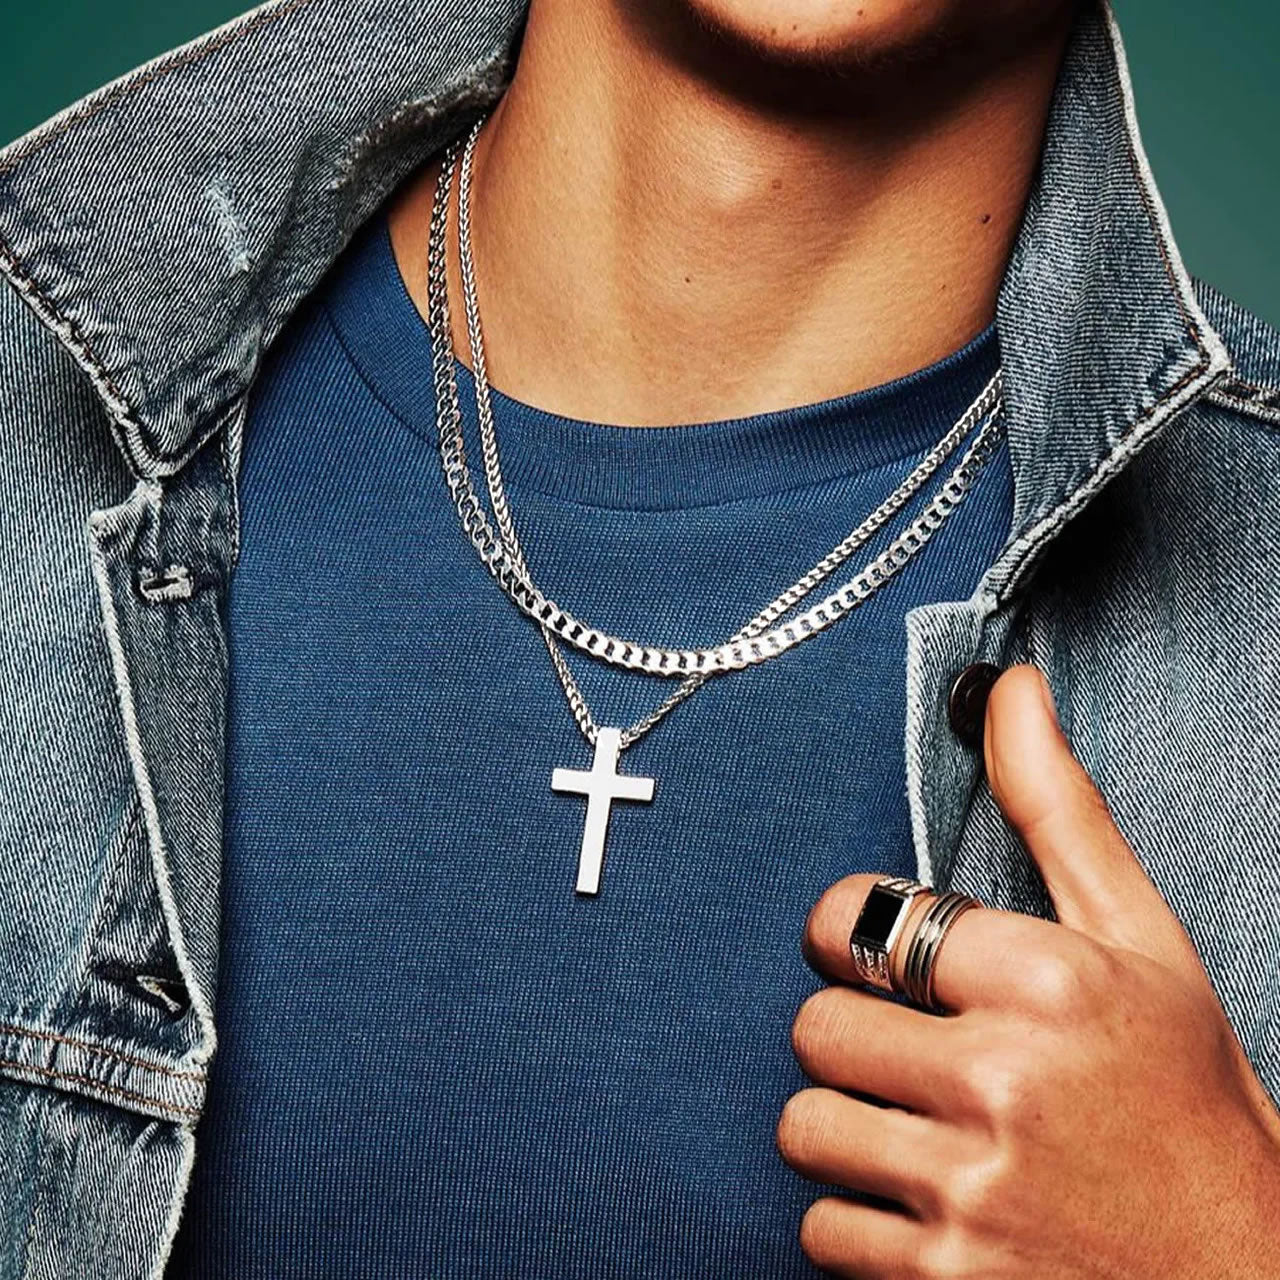 PELOVNY S925 Sterling Silver/Gold Plated Jesus Christ Crucifix Large Cross  Religious Pendant Necklace, Jesus Cross Jewelry, Antique Finish Cross  Necklaces For Men-Whistle Shape | Amazon.com